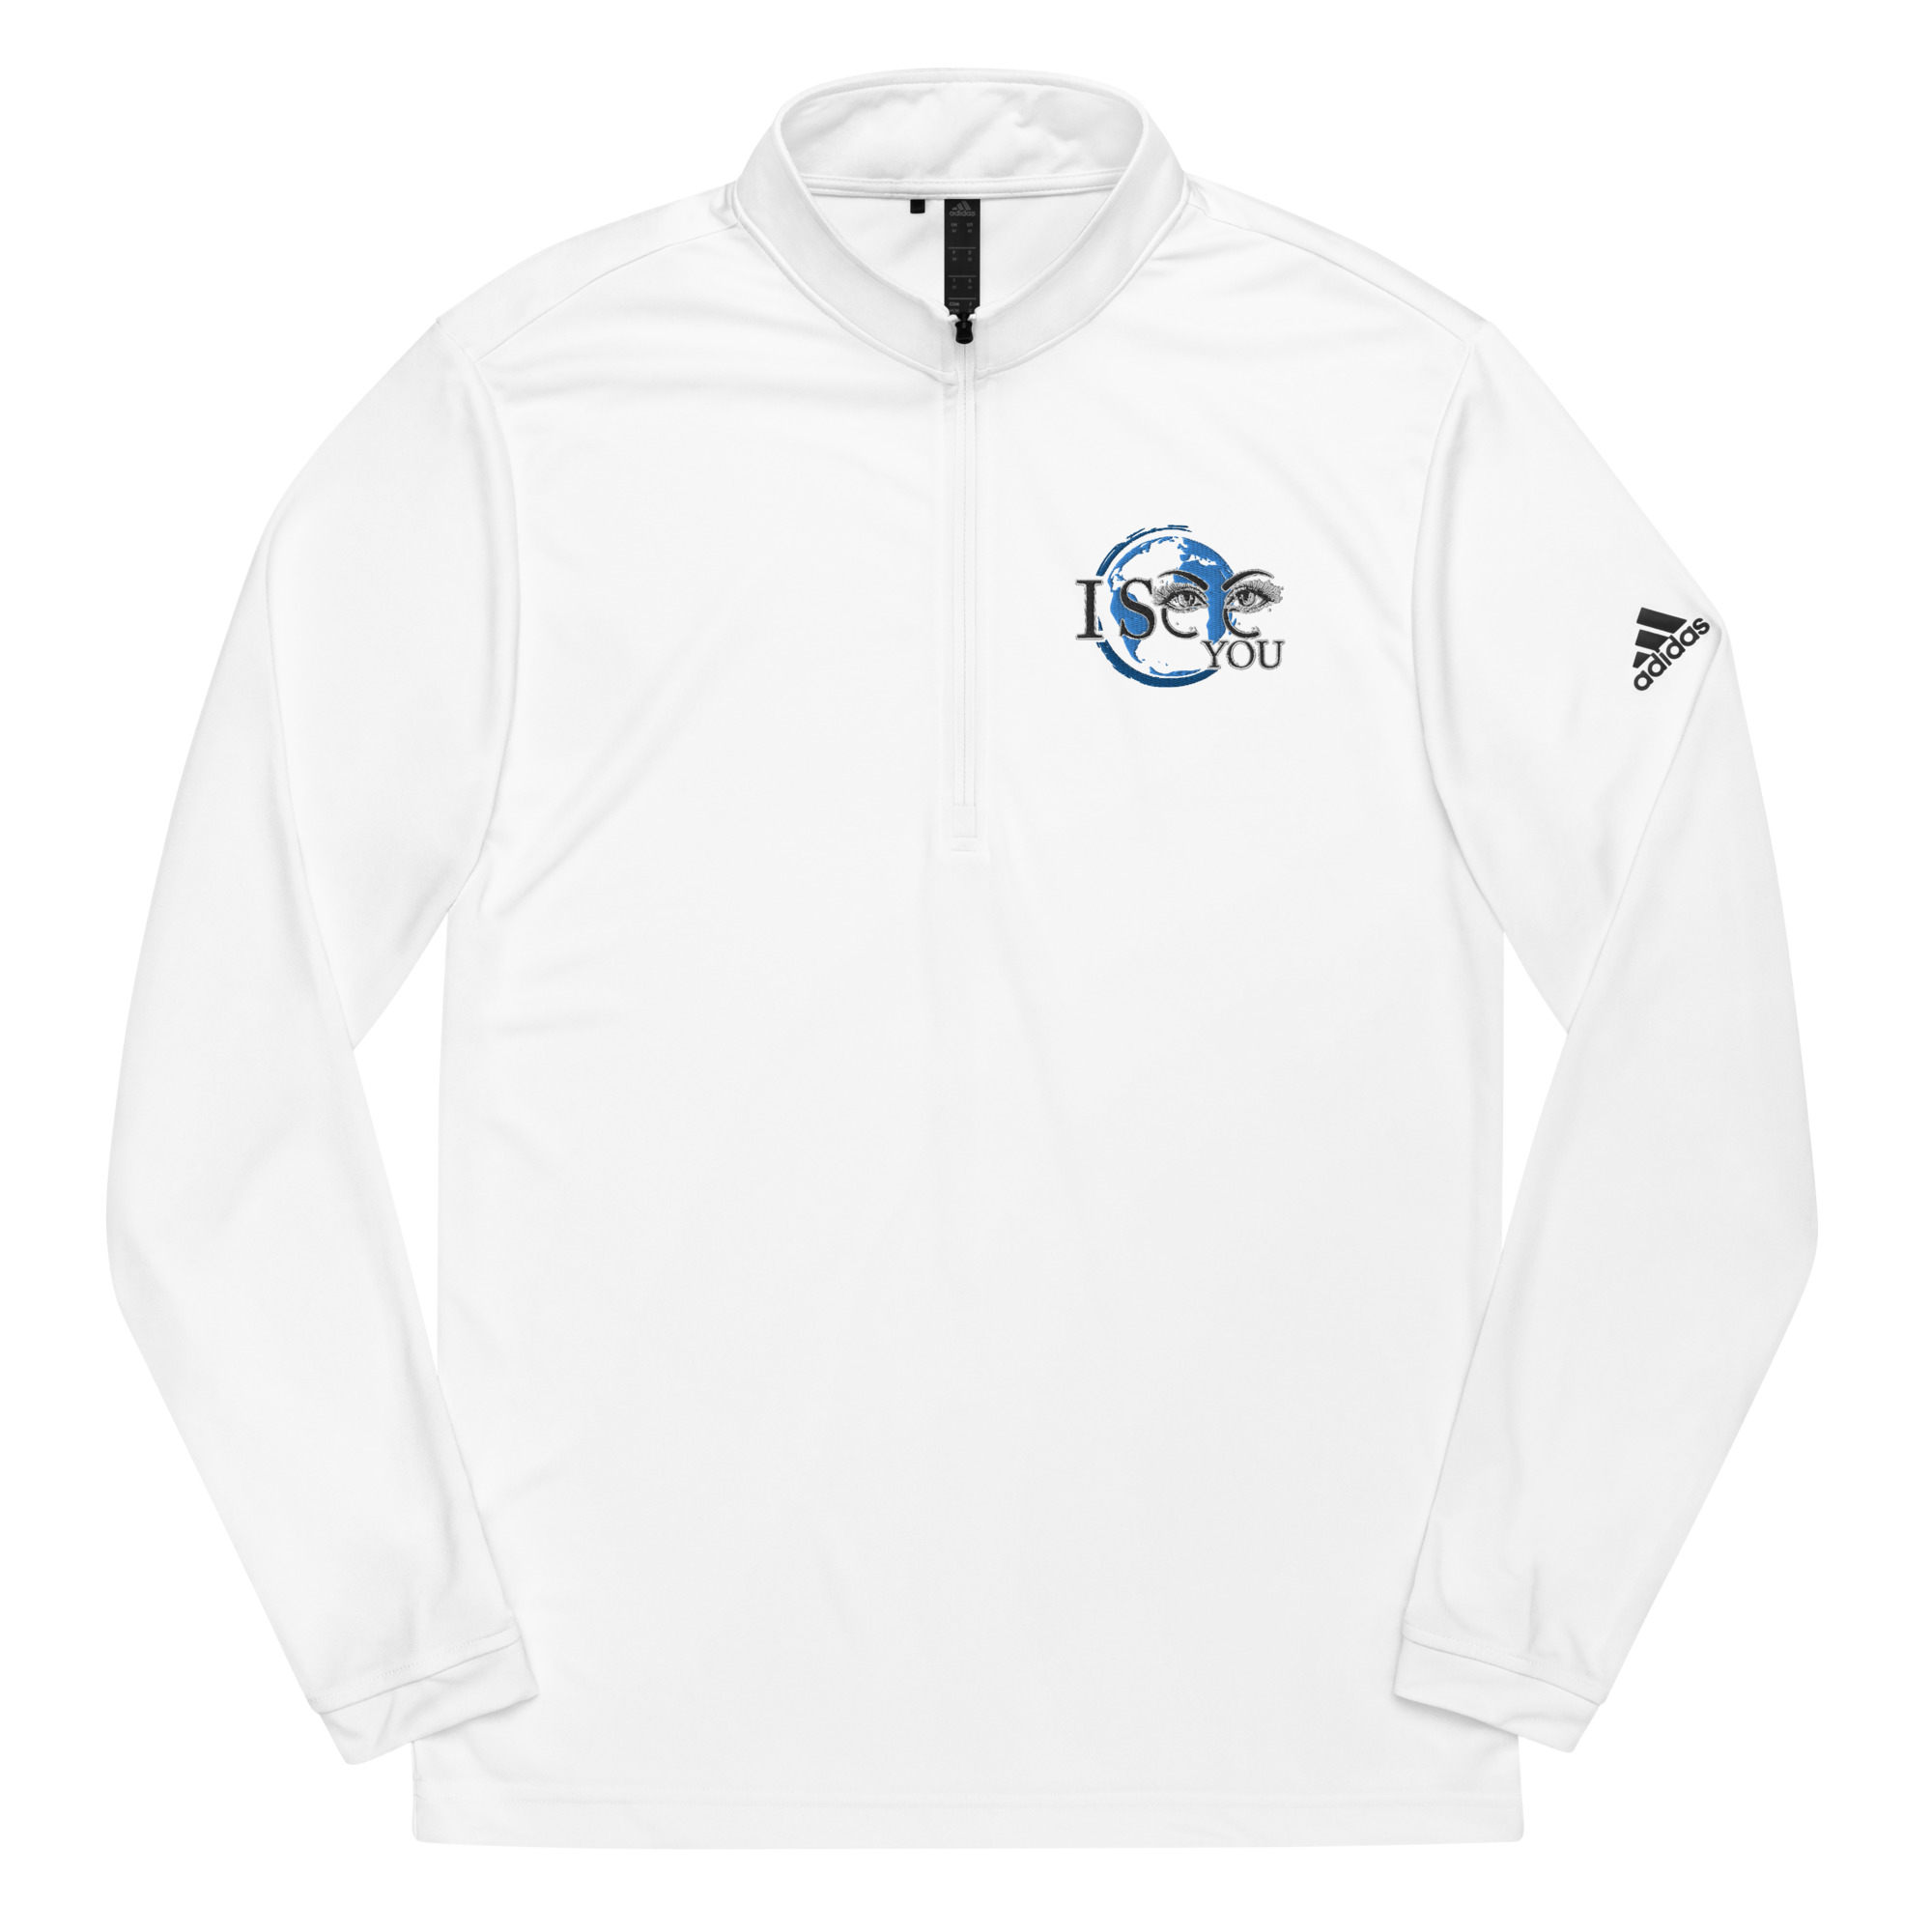 Quarter zip pullover - Welcome To I See You Store